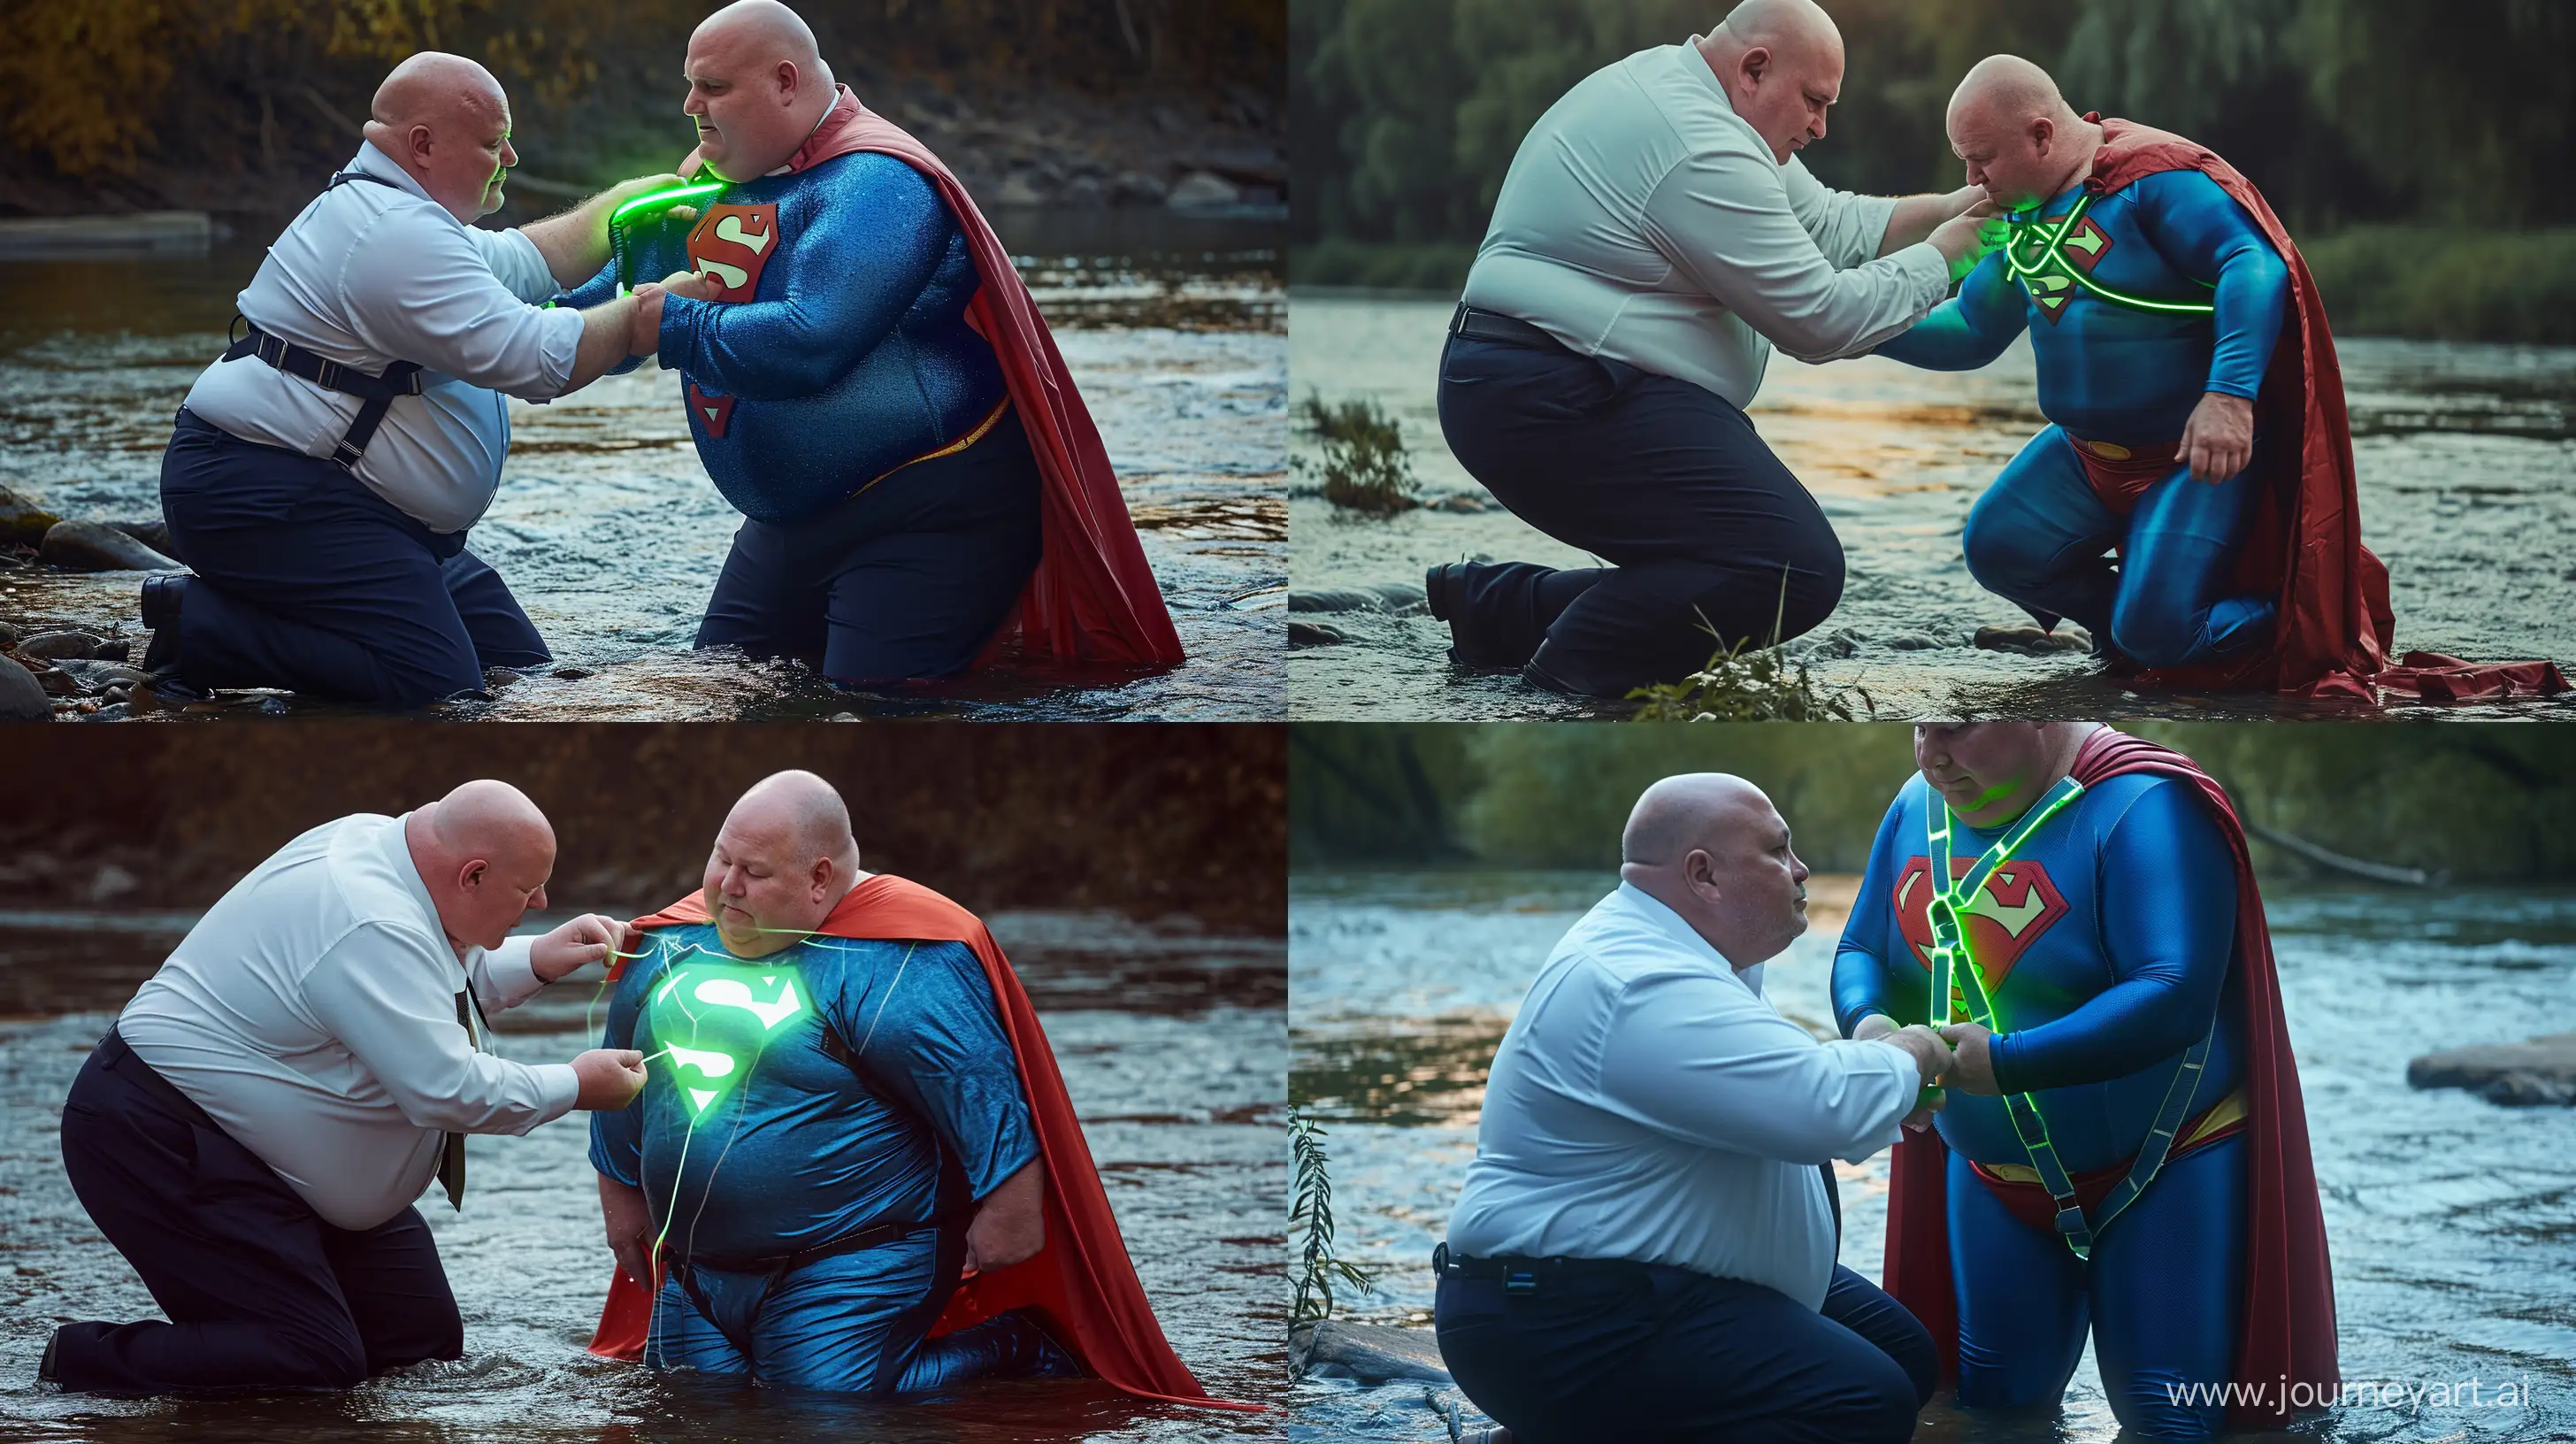 Senior-Supermen-in-River-Chubby-Duo-Harnessing-Green-Glow